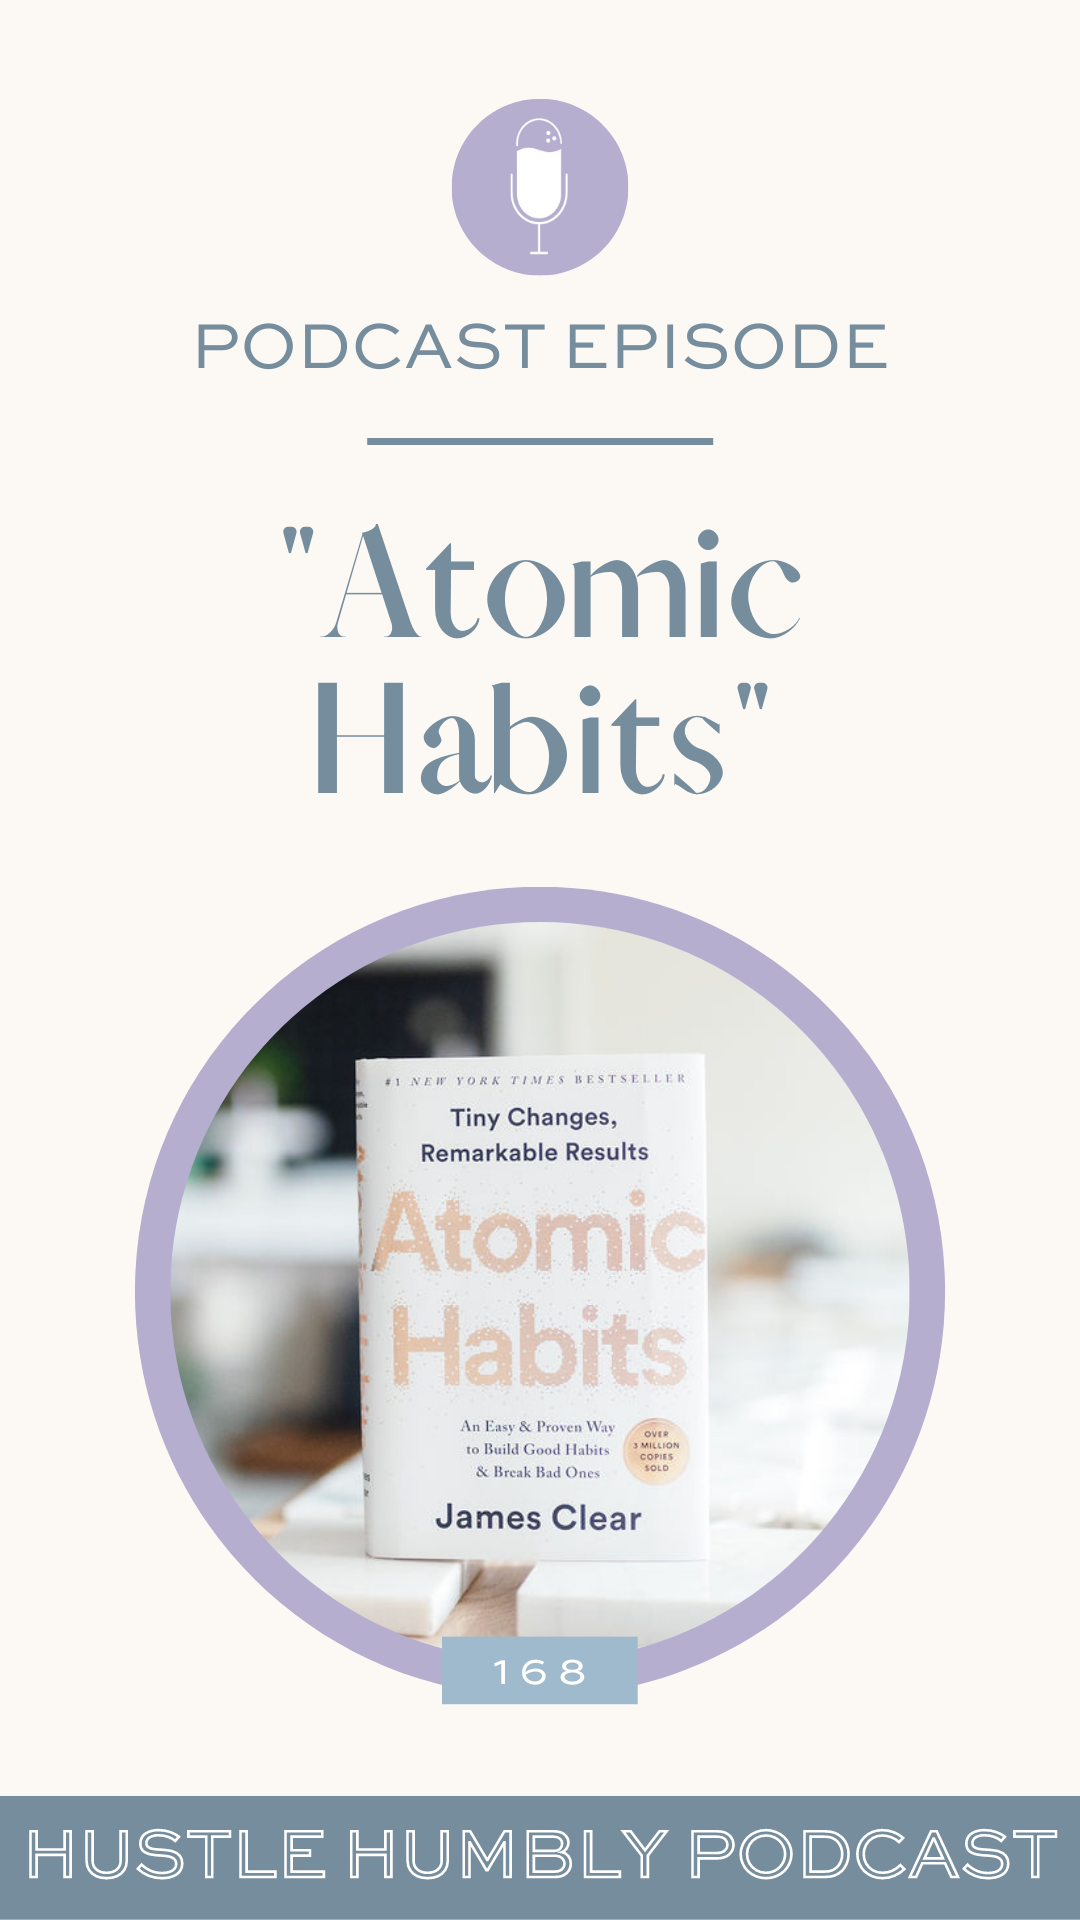 Hustle Humbly Podcast Episode 168: Atomic Habits Review